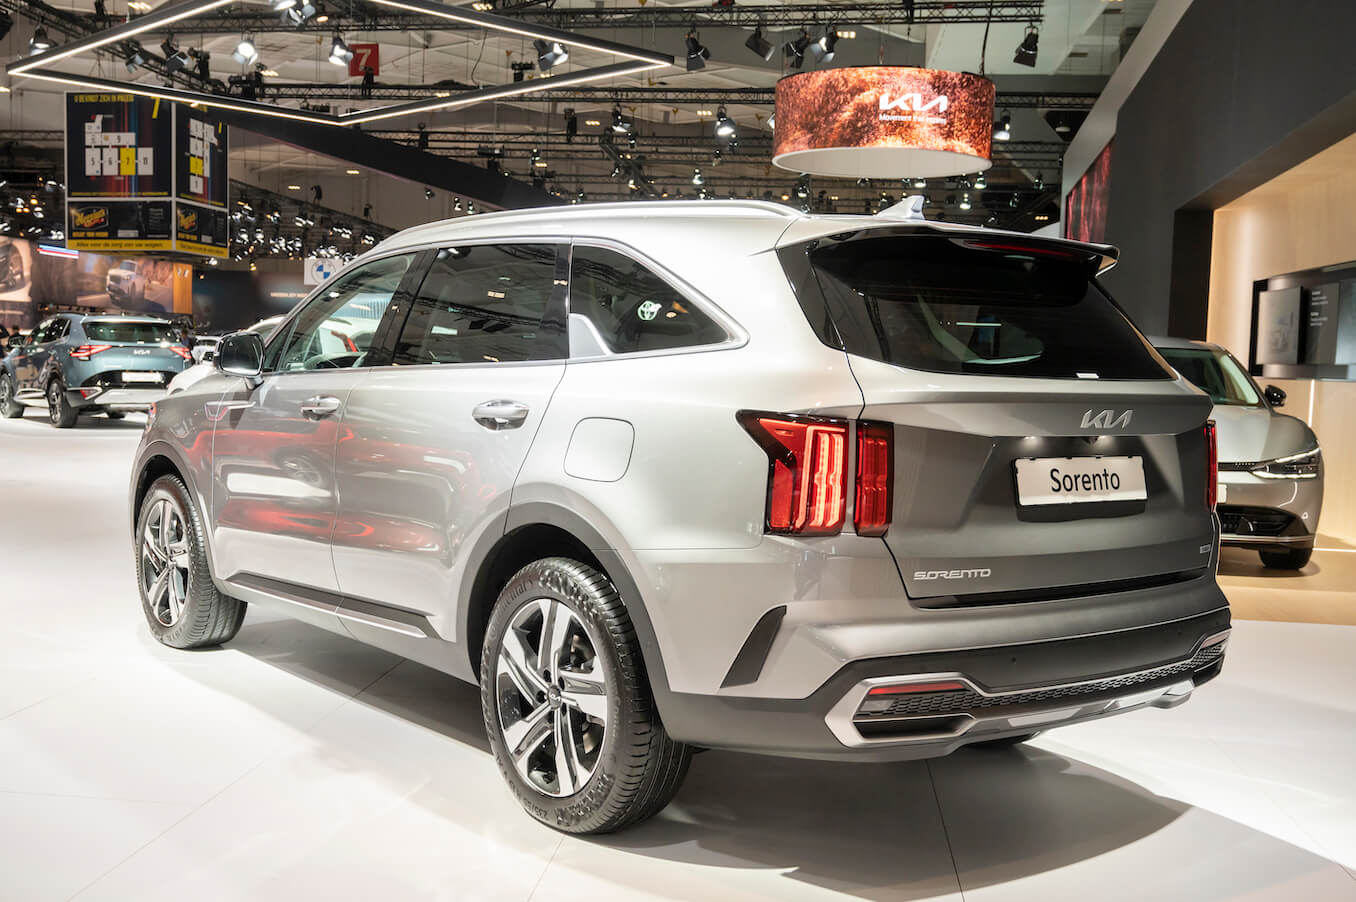 Rear of a gray 2023 Kia Sorento at Brussels Expo. The Kia Sorento's resale value is a big pro for it.